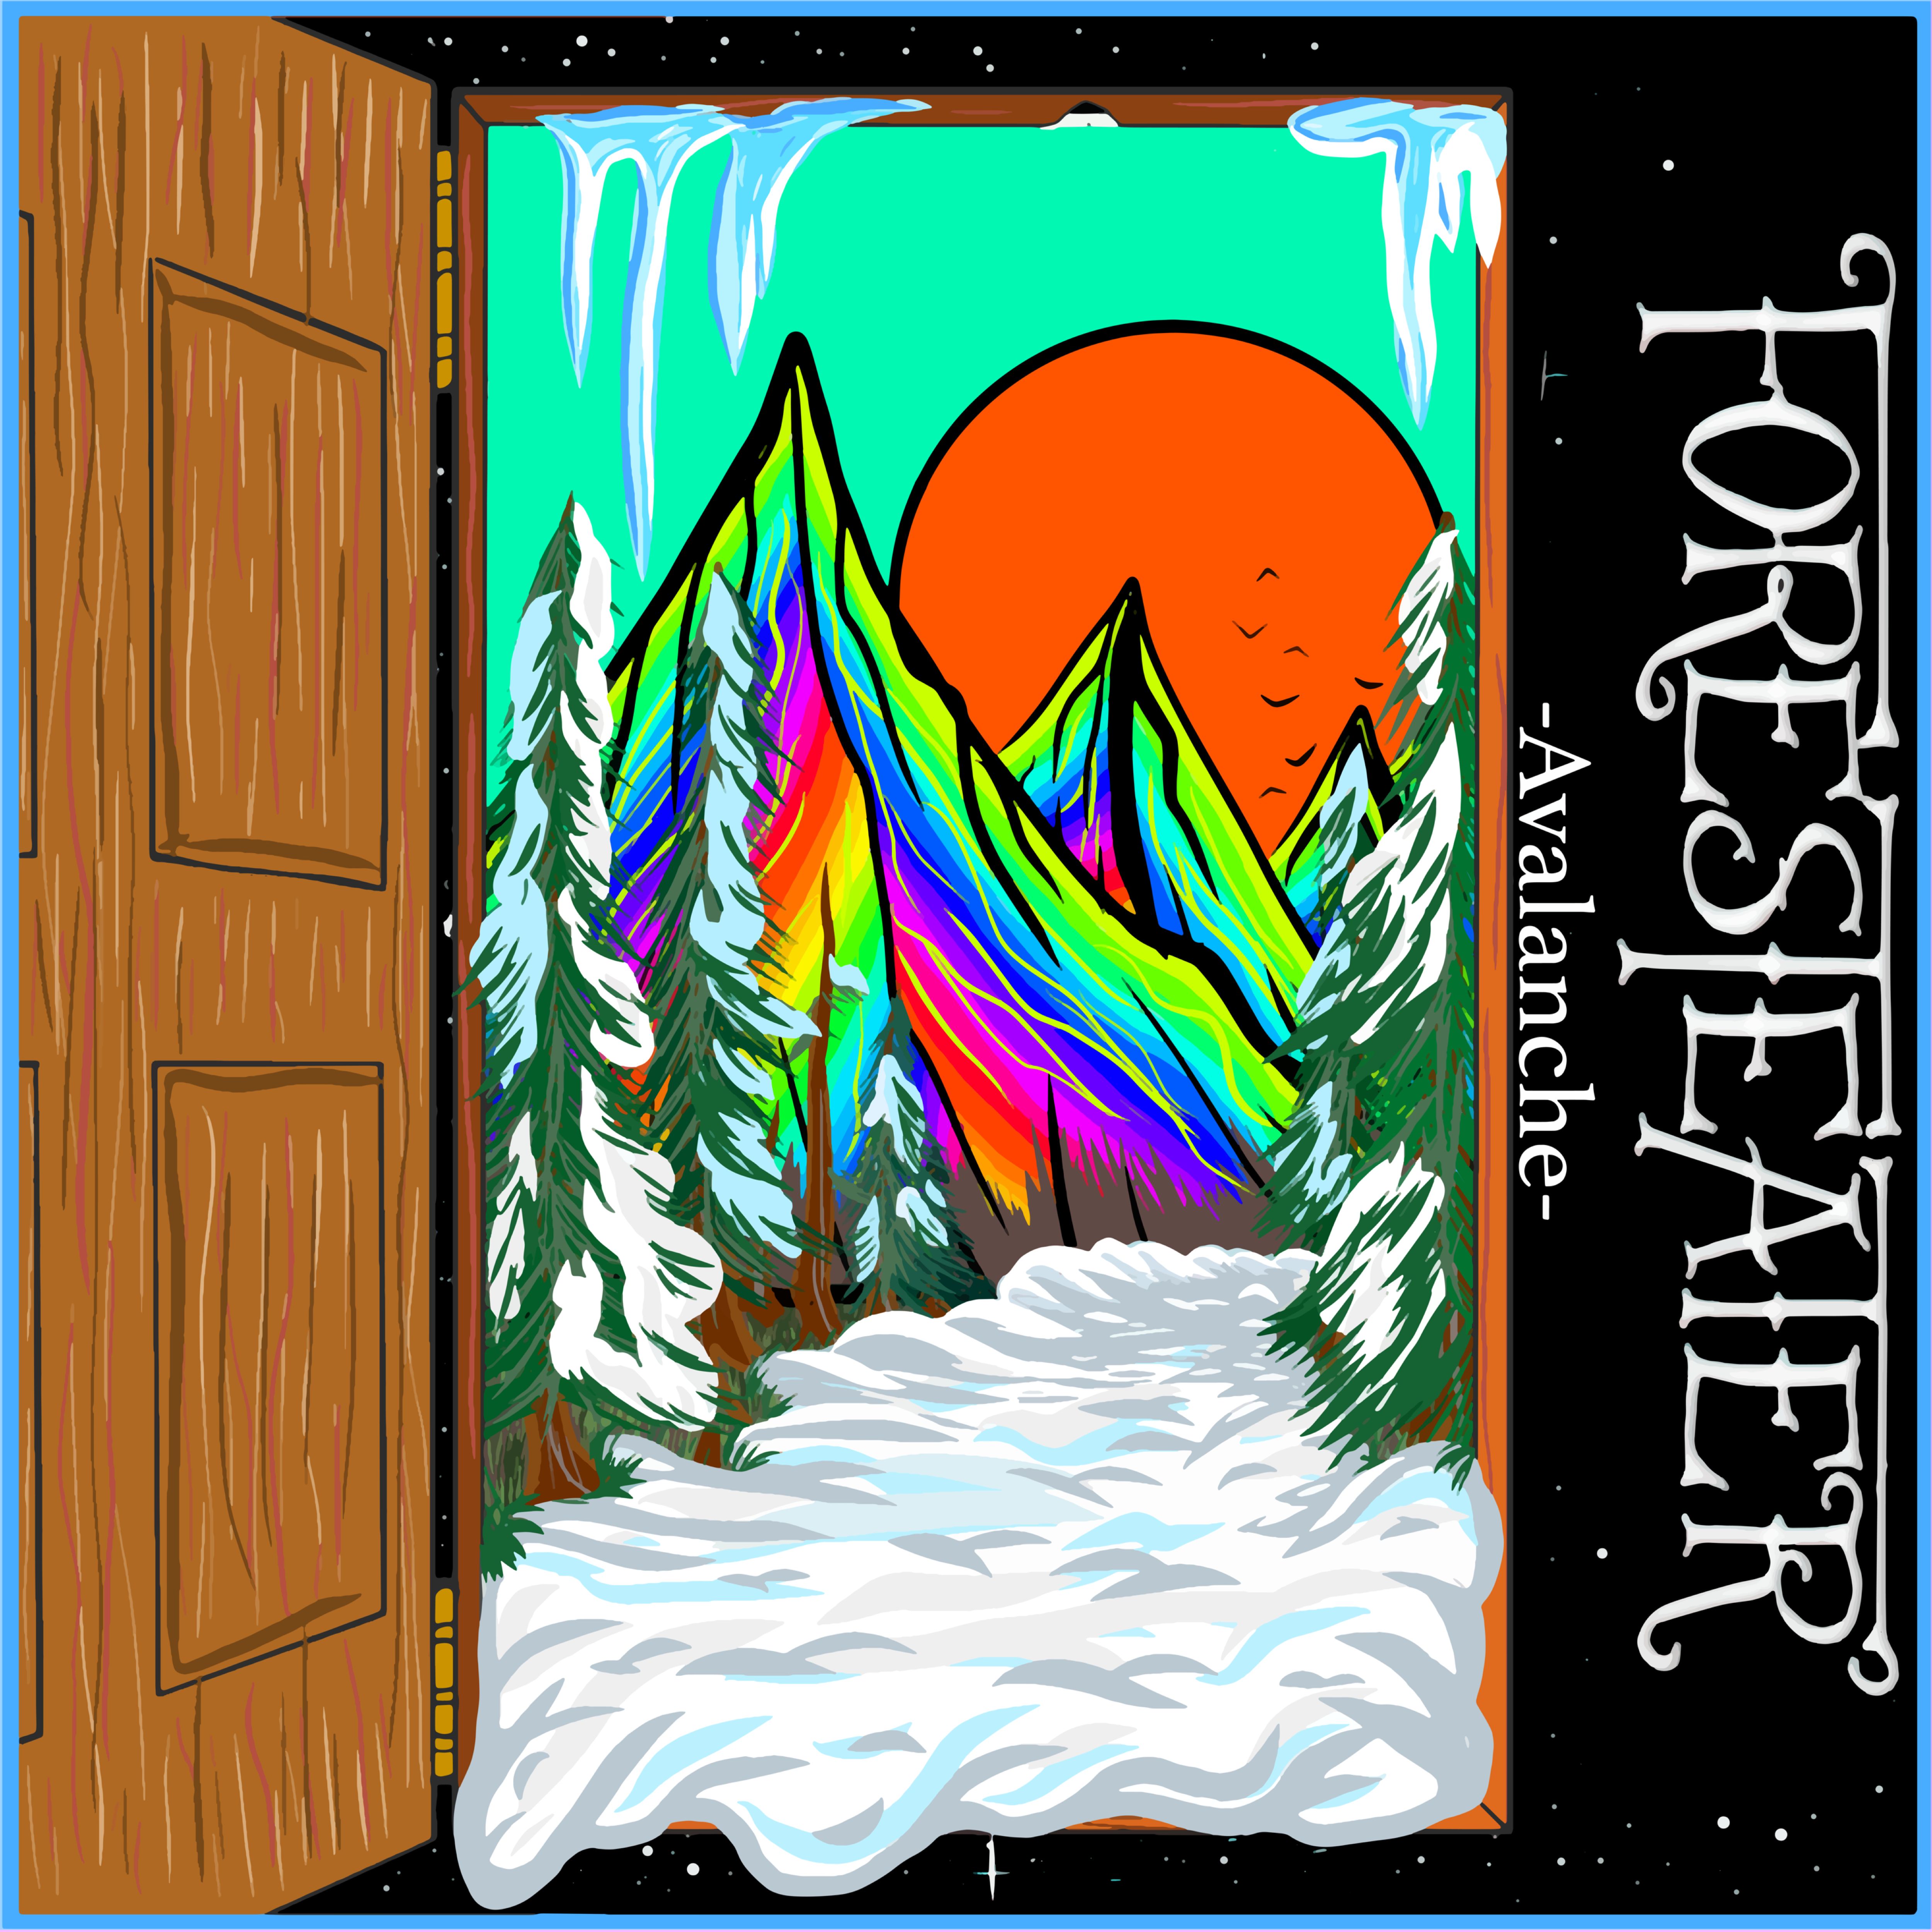 Foresteater – “Avalanche”